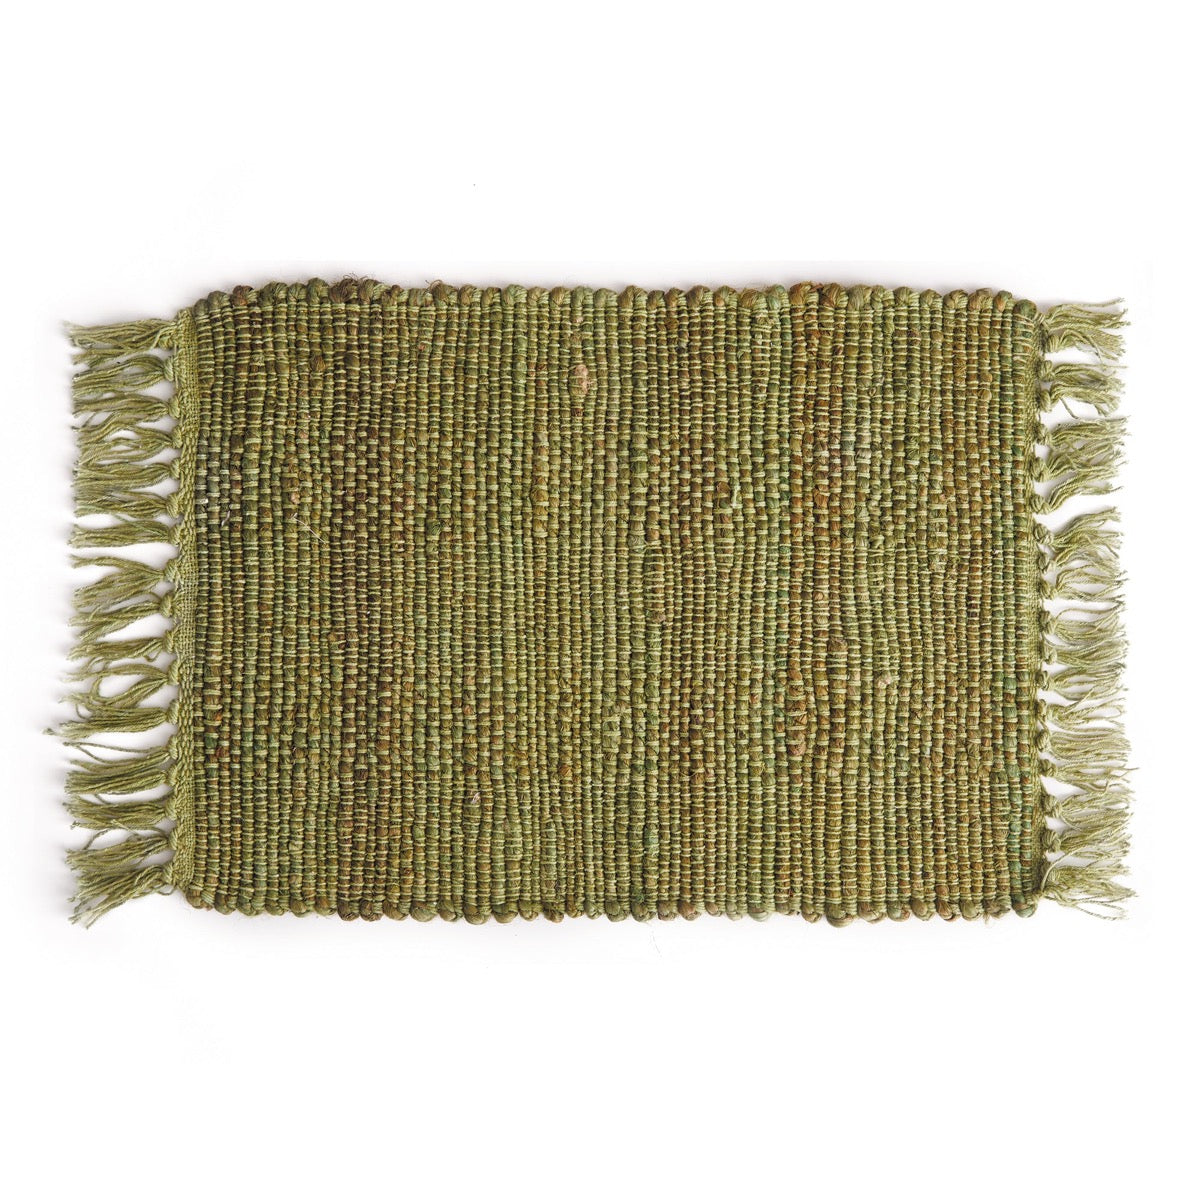 Woven Fringe Placemat - Green. Top view.